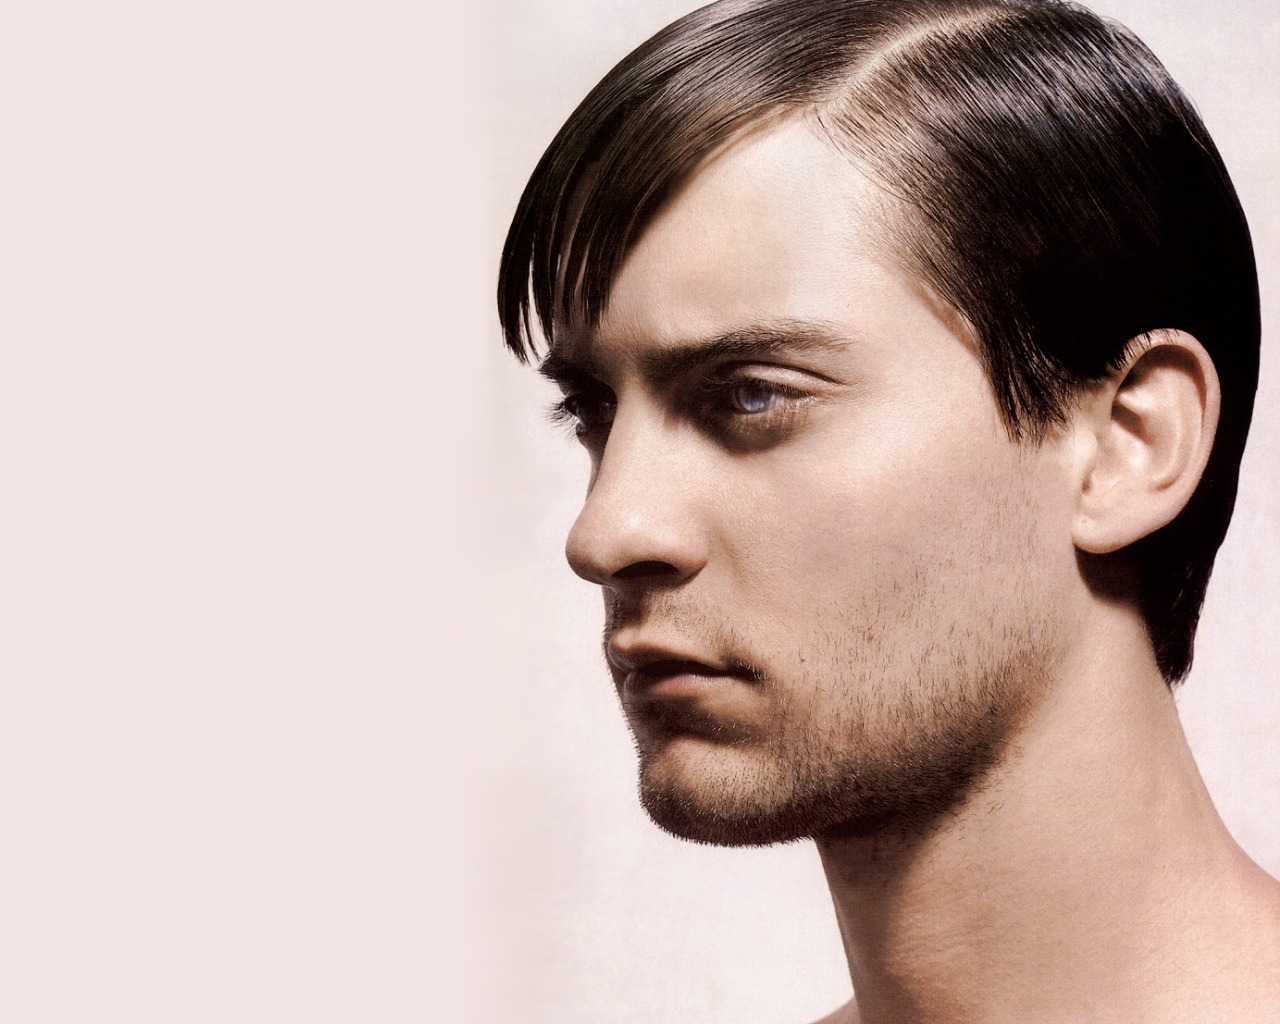 Tobey_Maguire_02_1280x1024.jpg